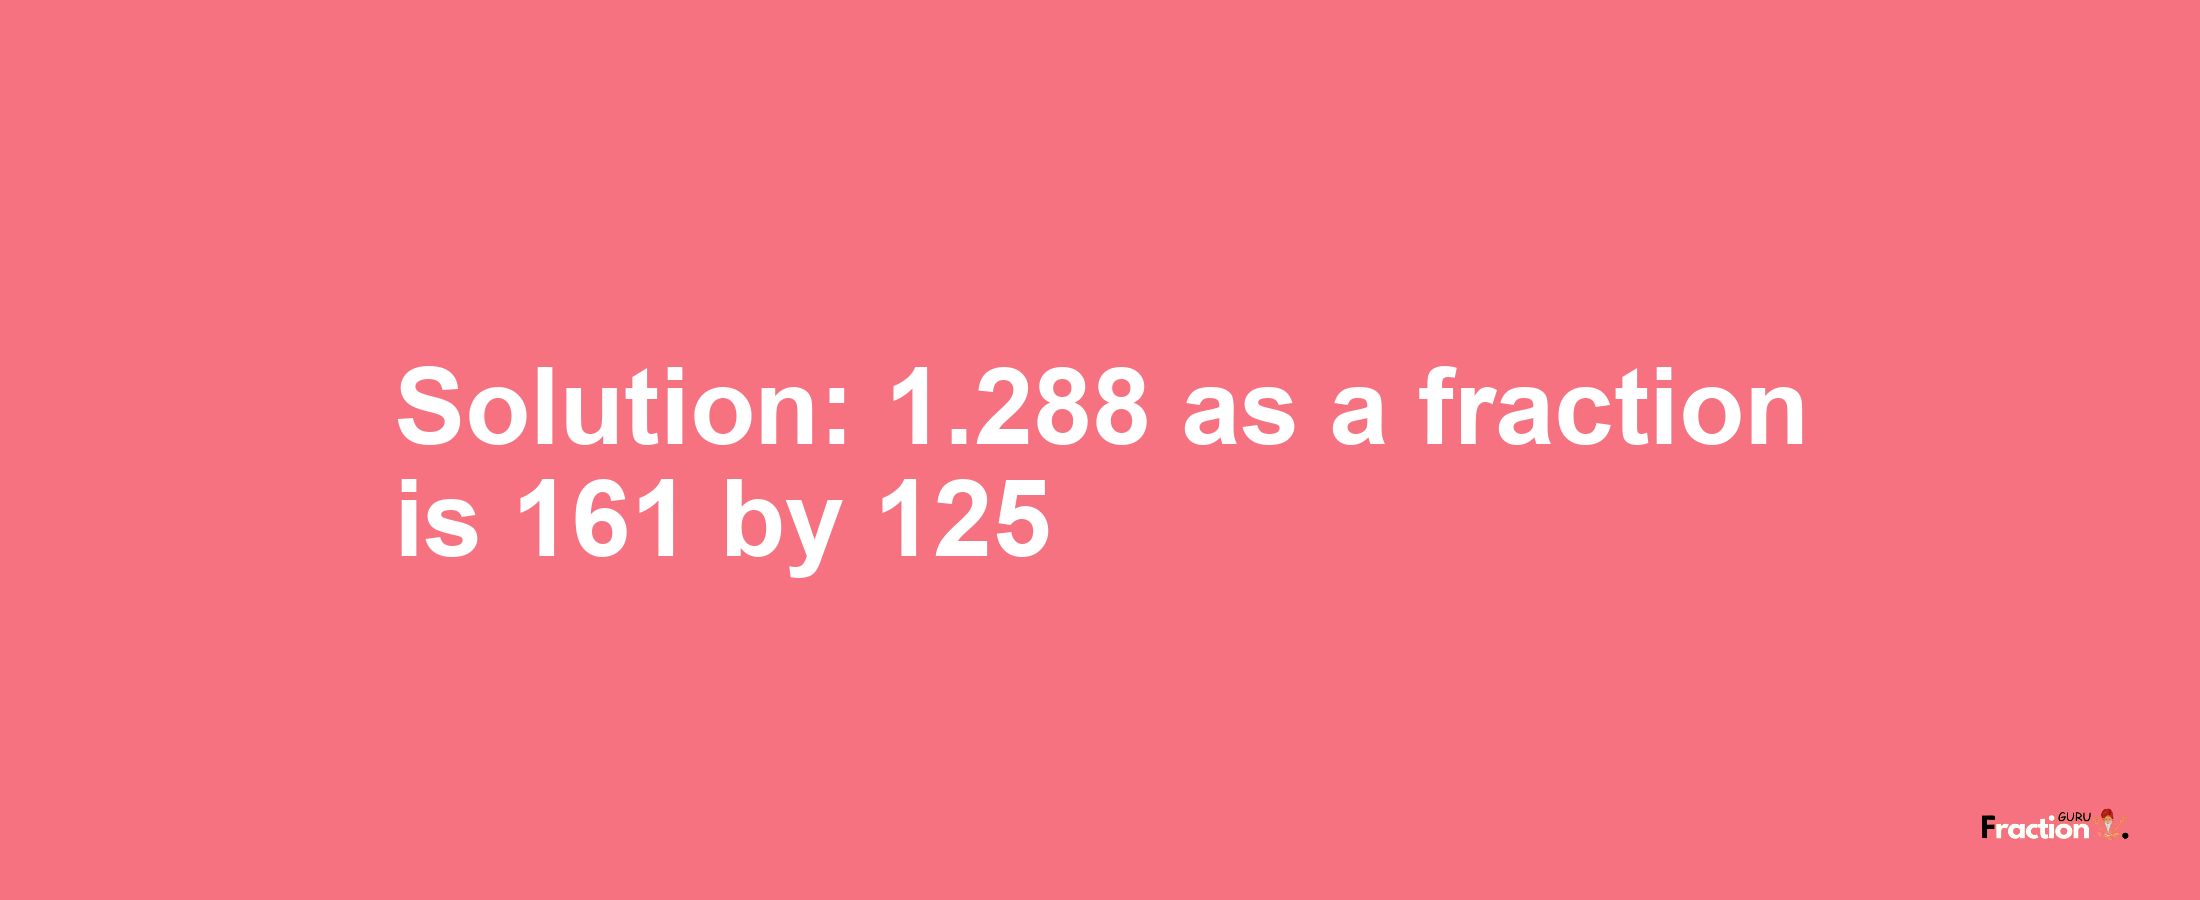 Solution:1.288 as a fraction is 161/125